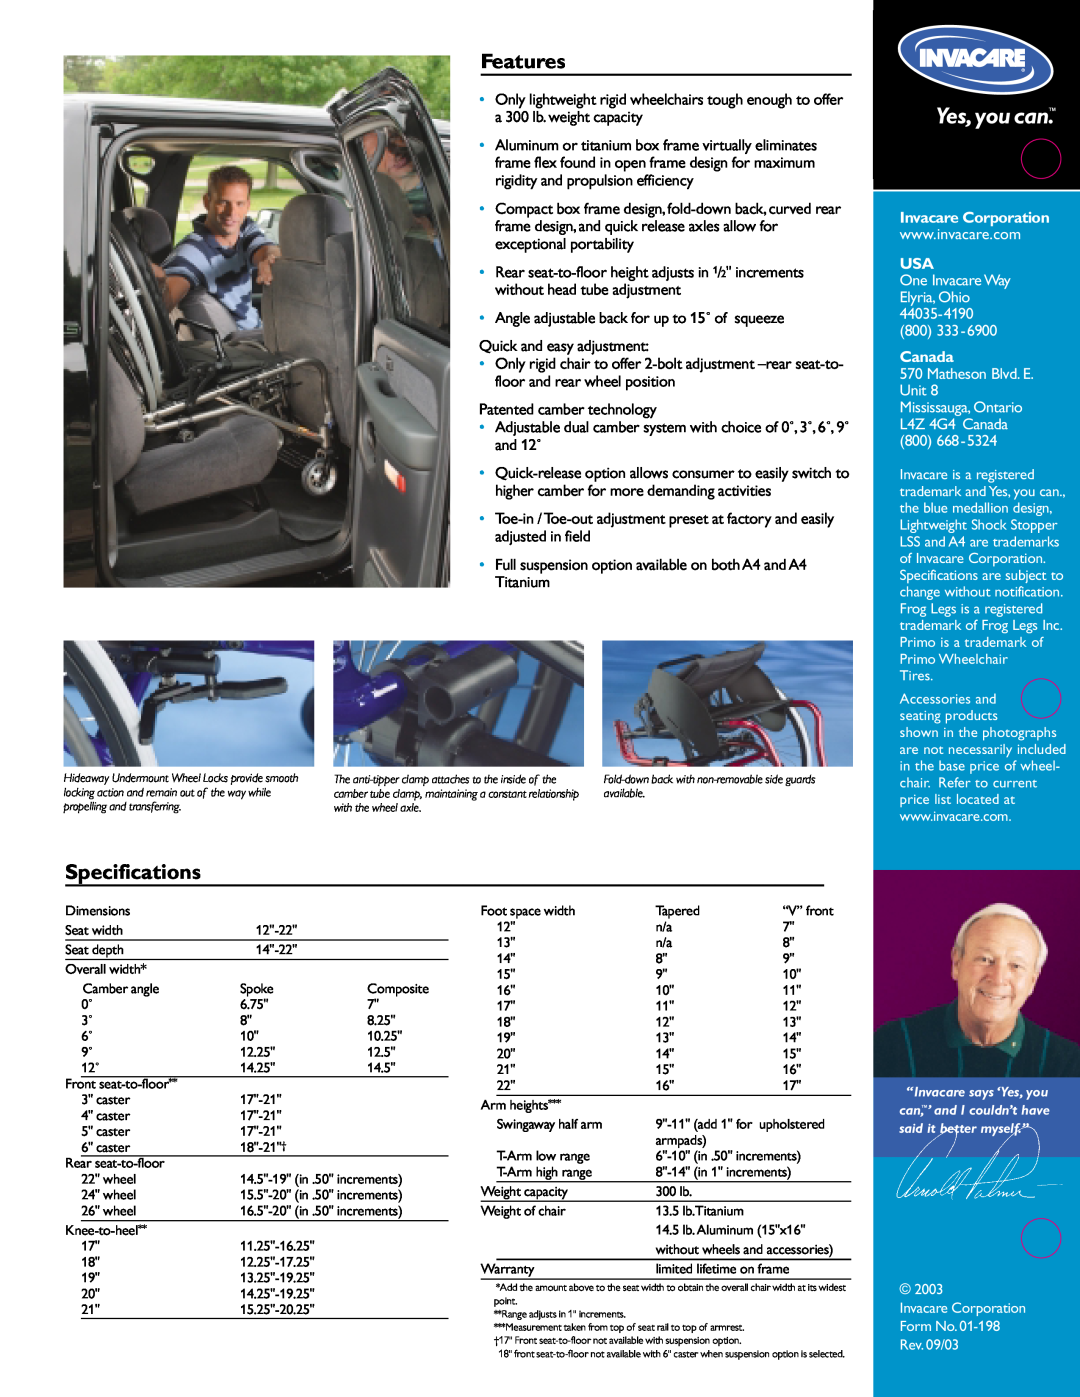 Invacare A4TM manual Features, Specifications, Invacare Corporation, One Invacare Way Elyria, Ohio 44035-4190 800, Canada 